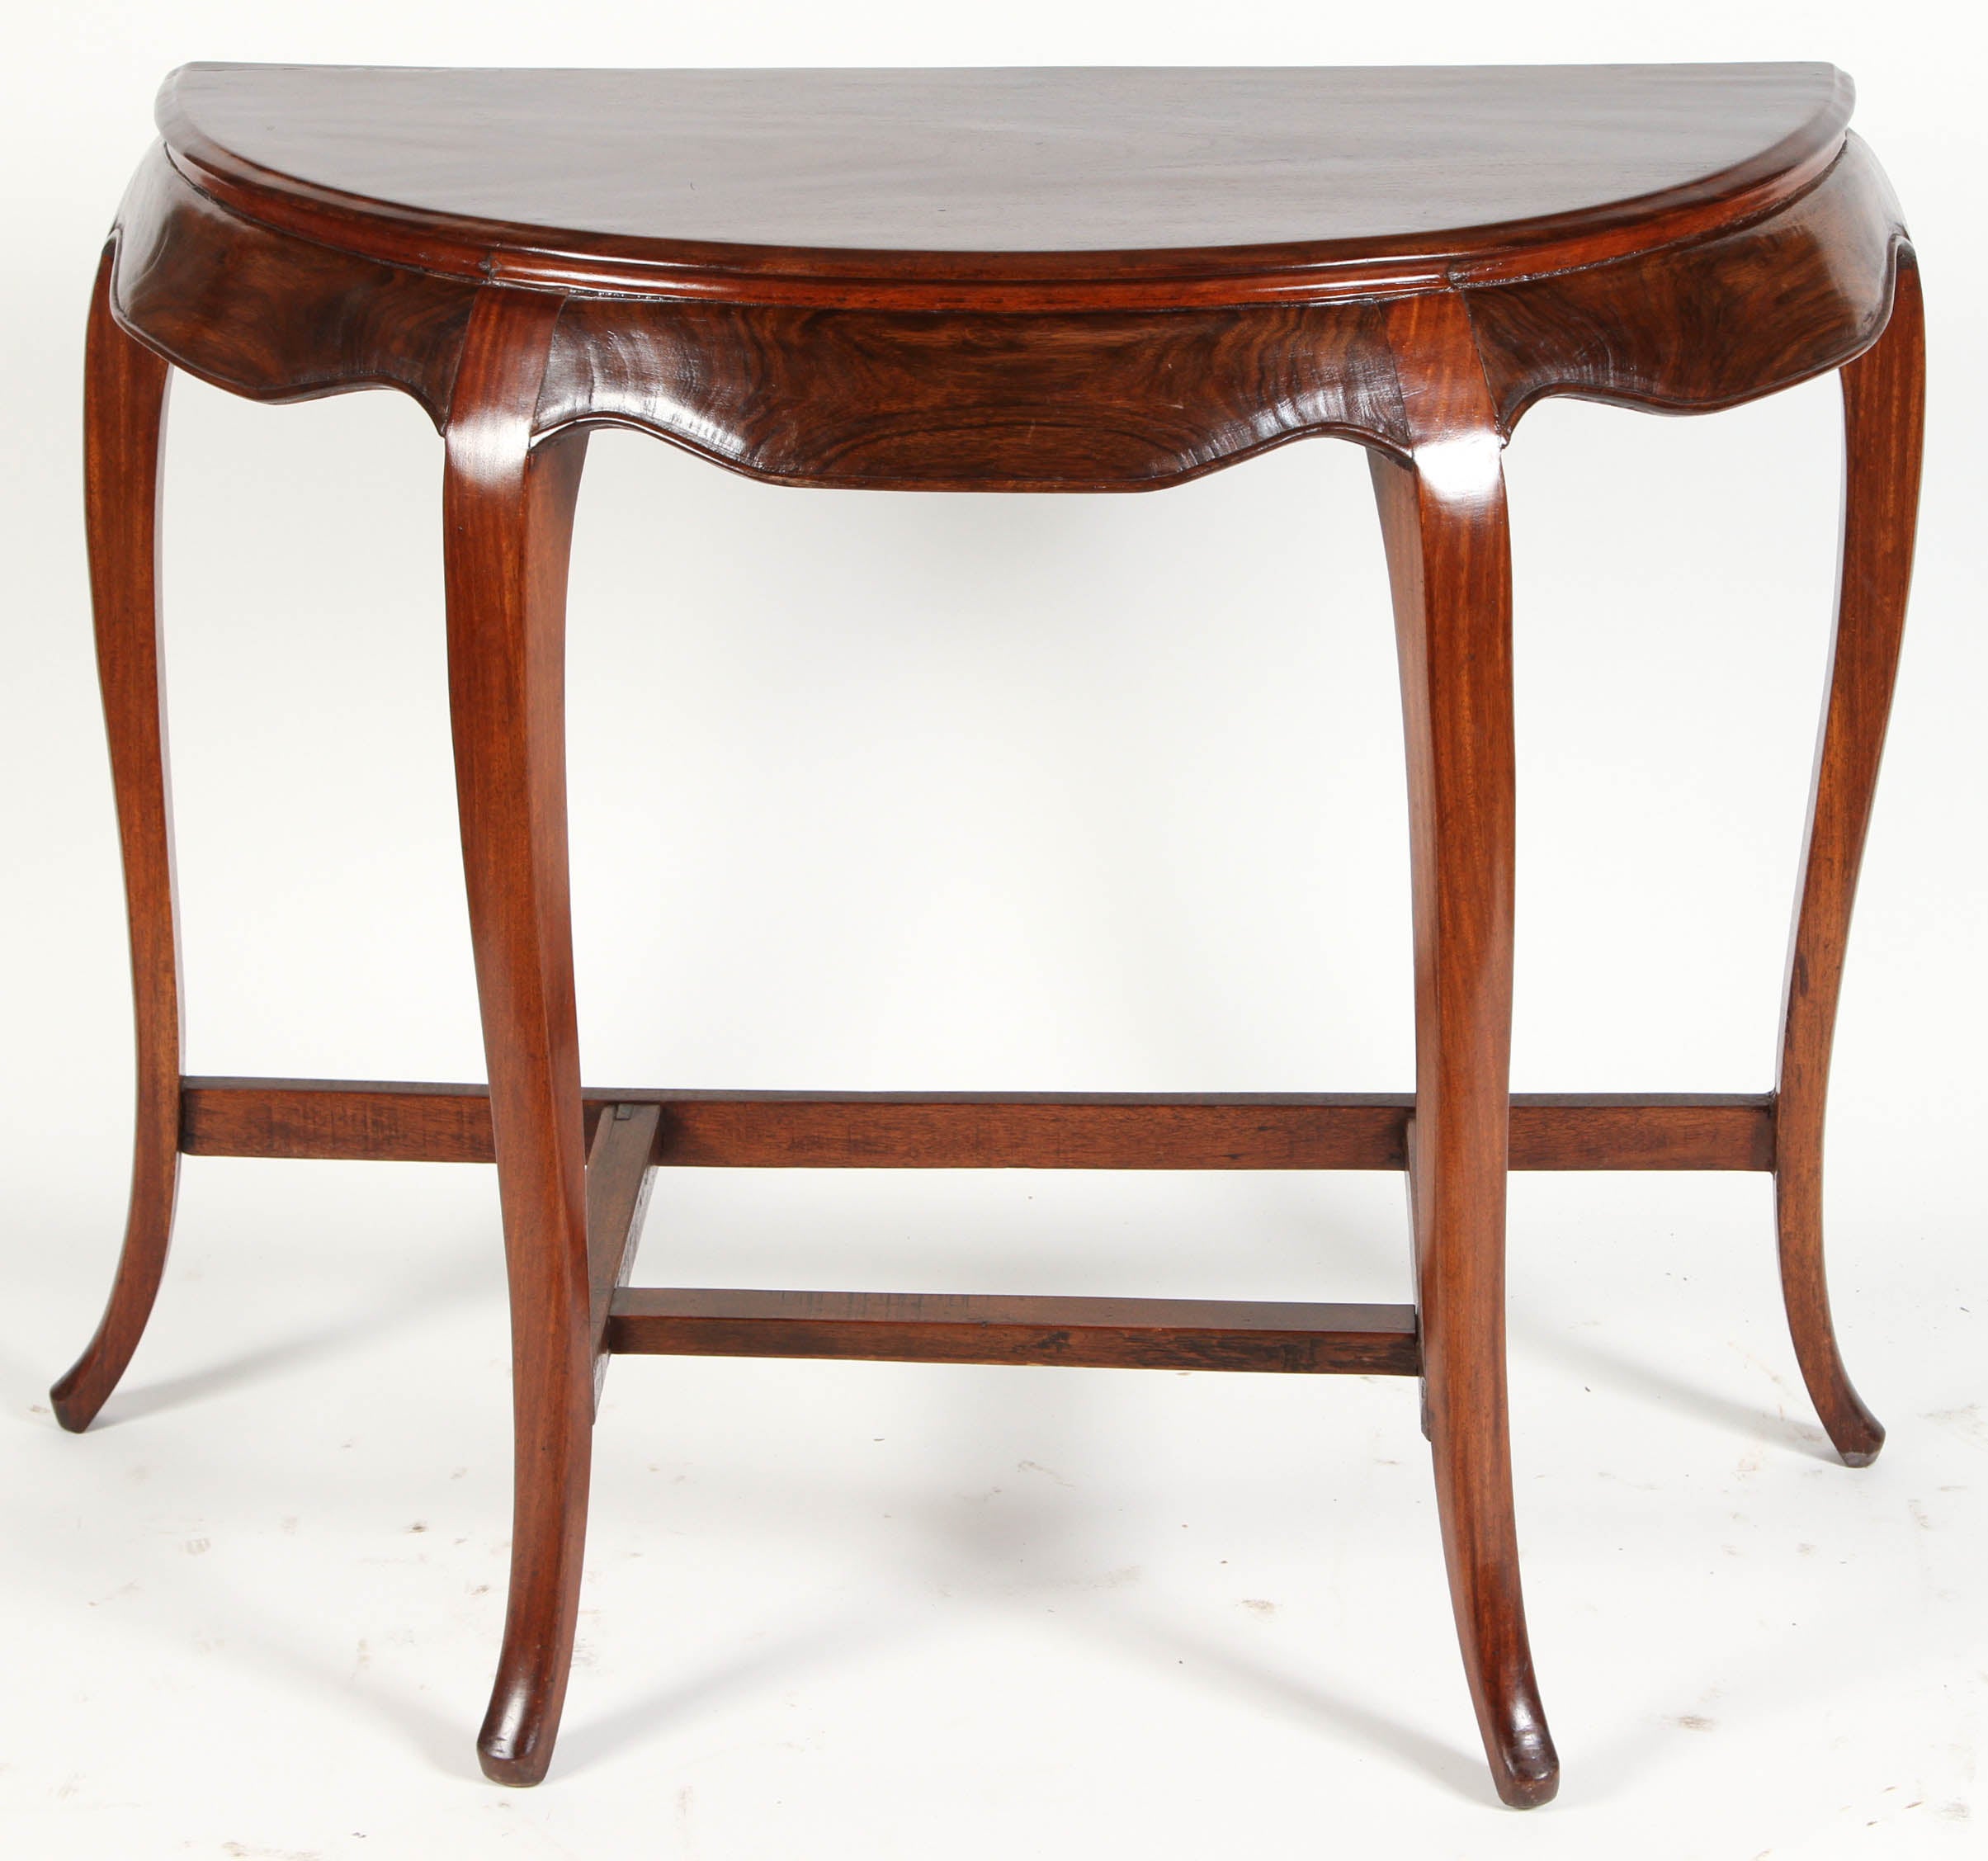 Chinese Rosewood Demilune Table